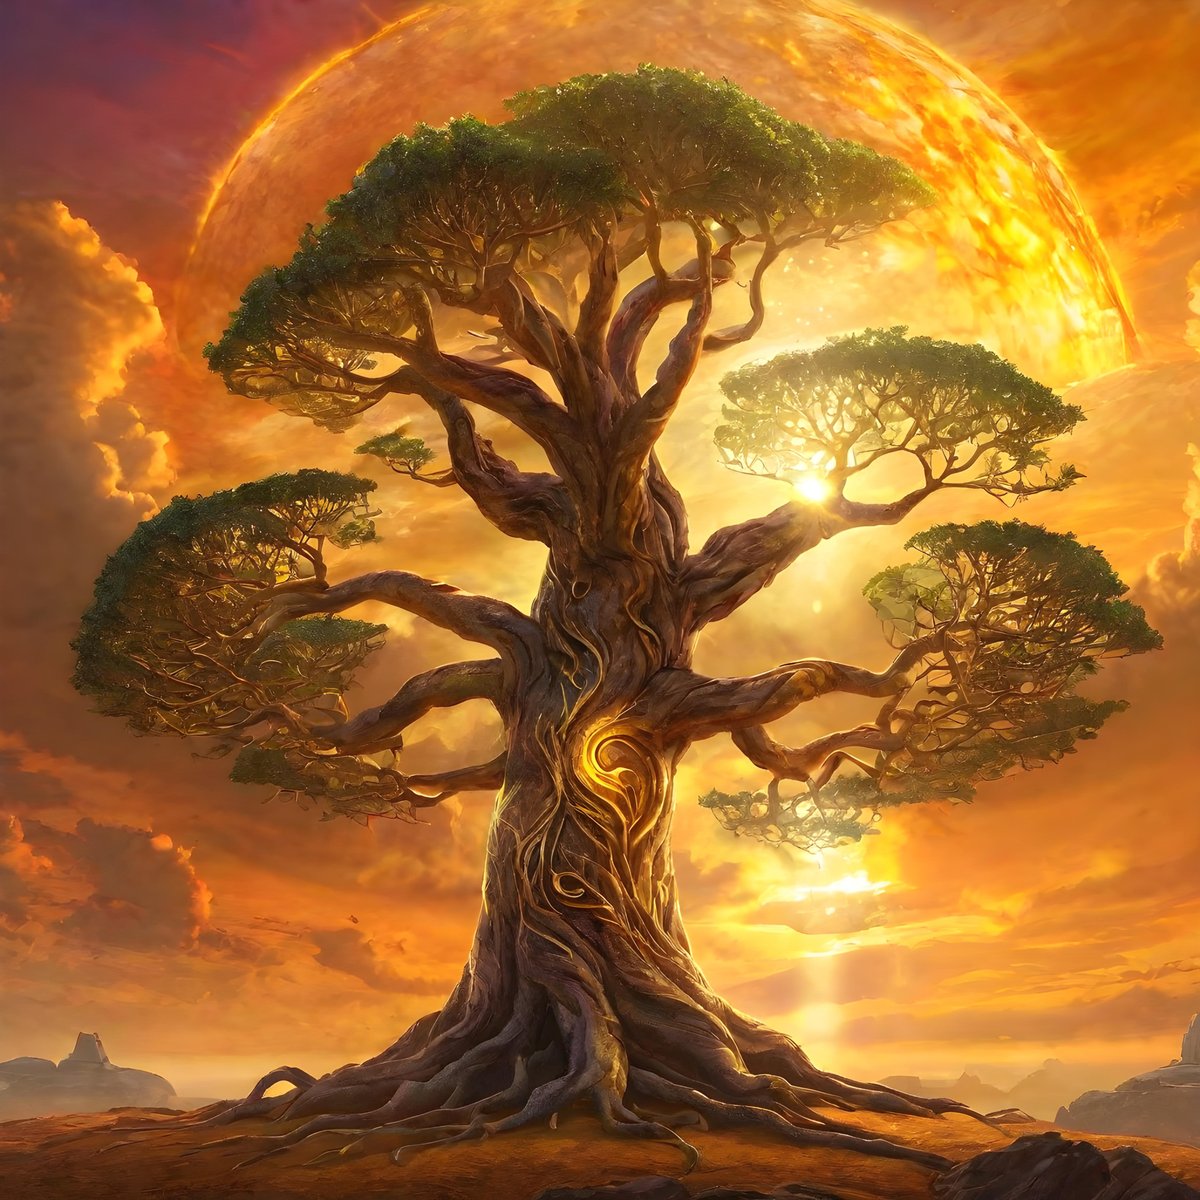 Whispers of Time The Ancient Trees #trees #ancienttrees #nature #sunset #ai #digitalart #art #artificialintelligence #aigenerated #generativeai #machinelearning #aiart #aiartistcommunity